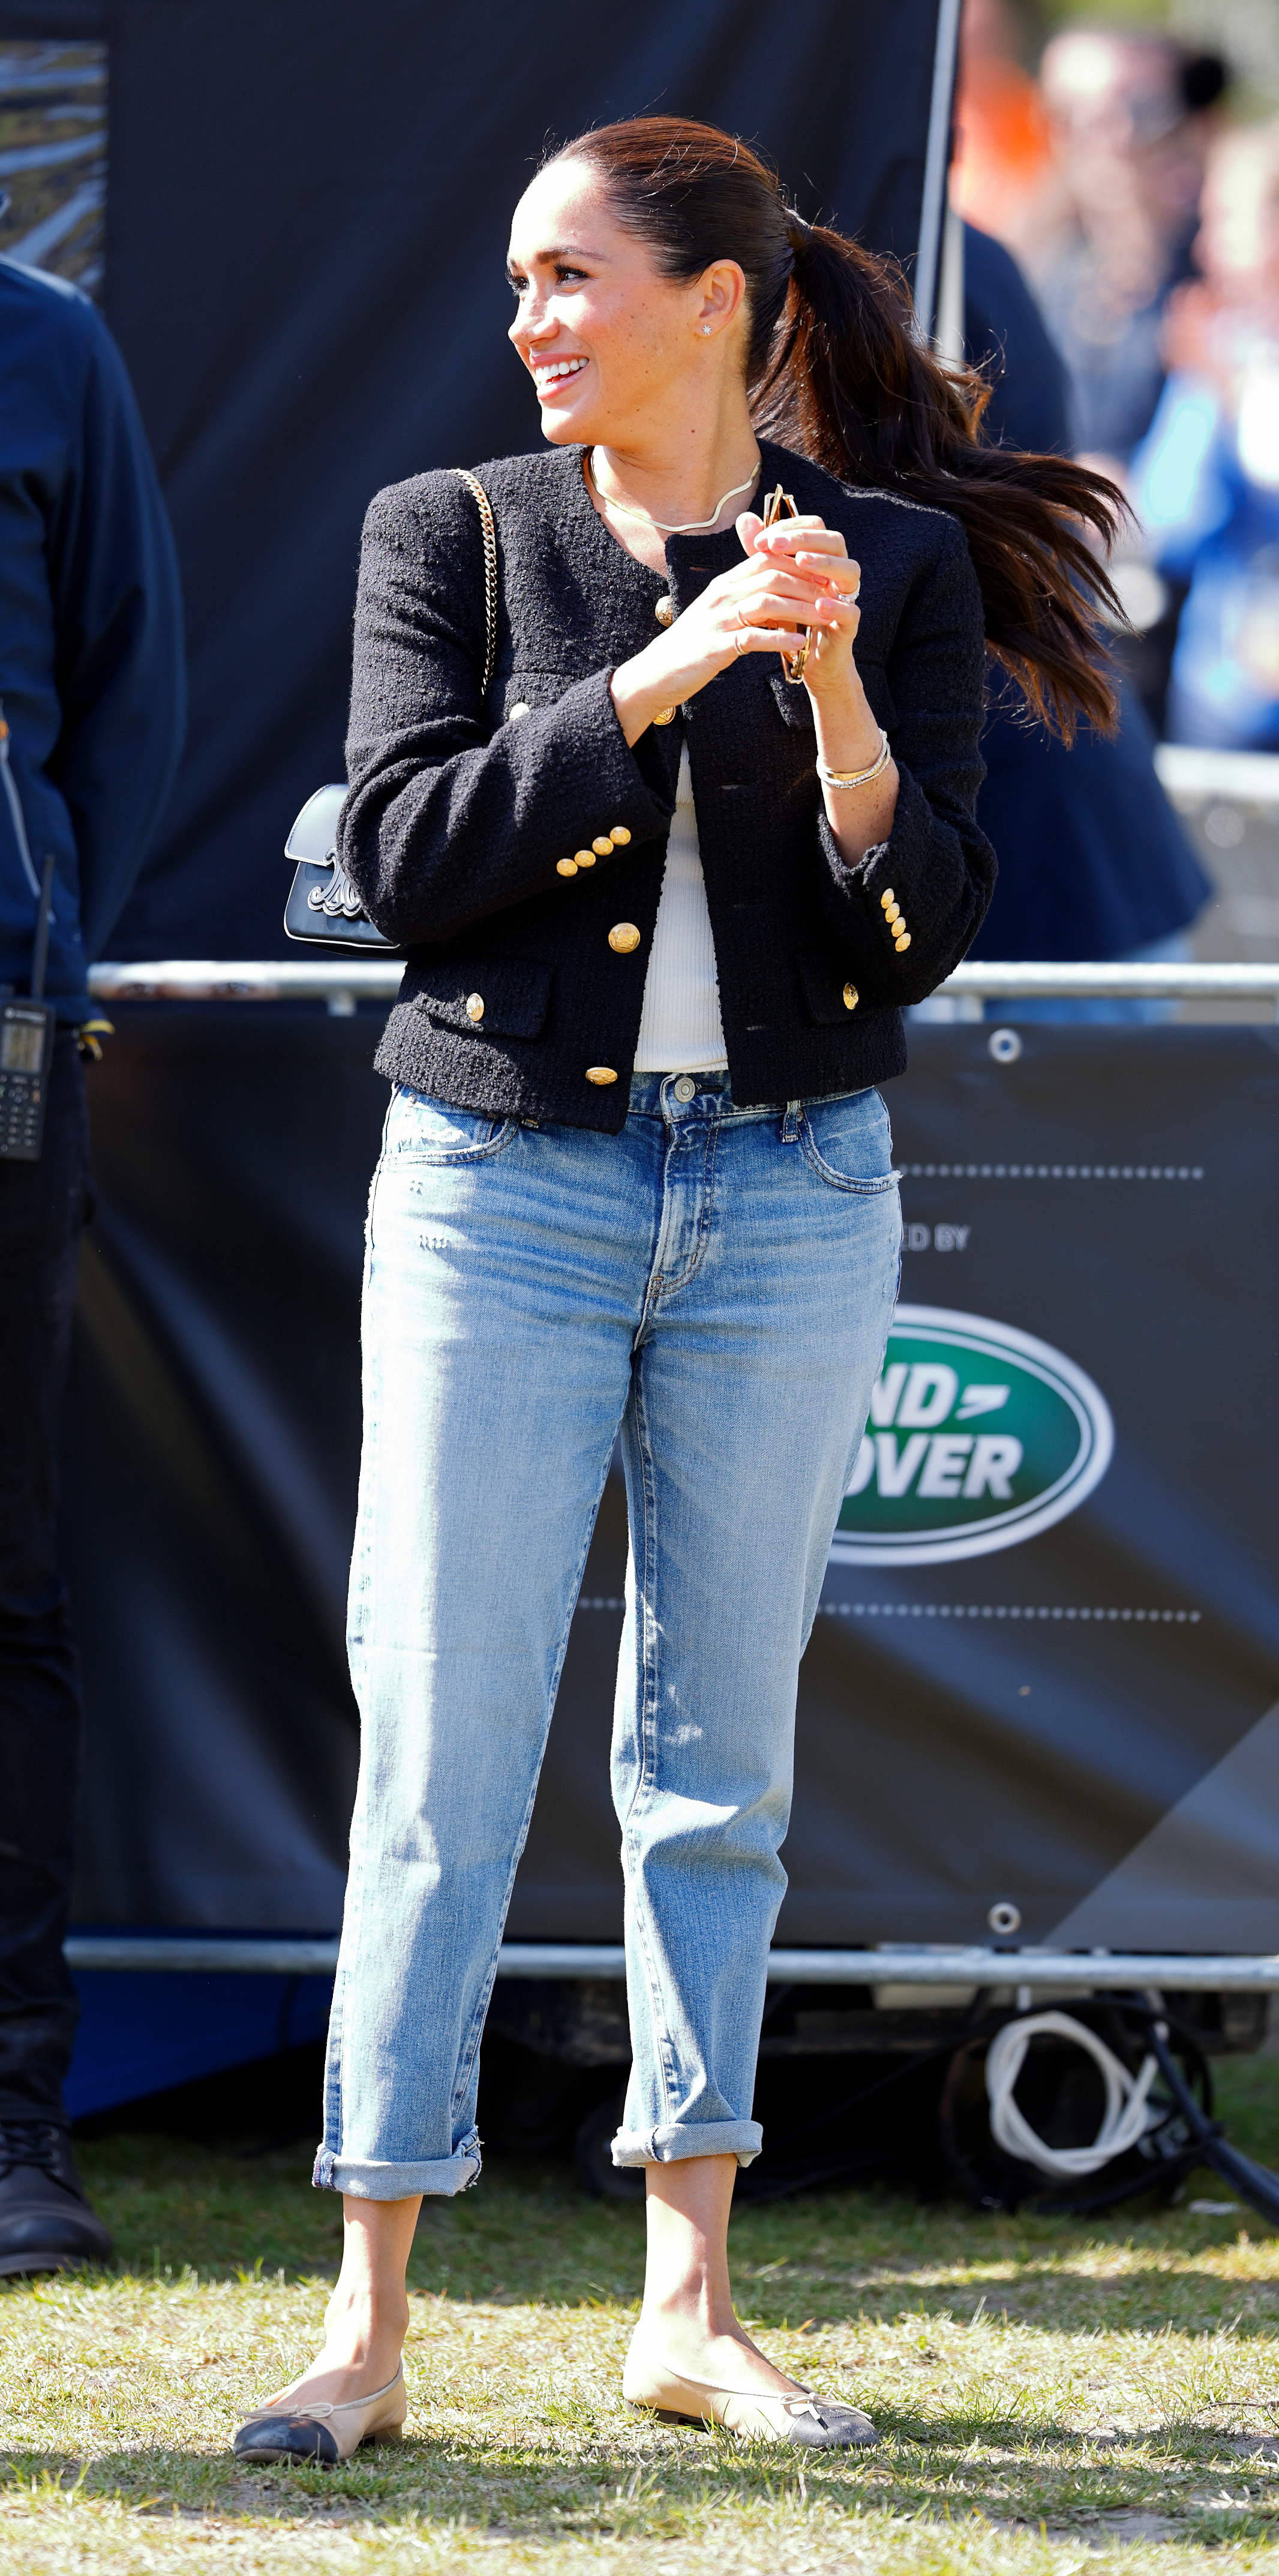 Meghan Markle at the Invictus Games in The Hague, Netherlands on April 16, 2022 | Source: Getty Images